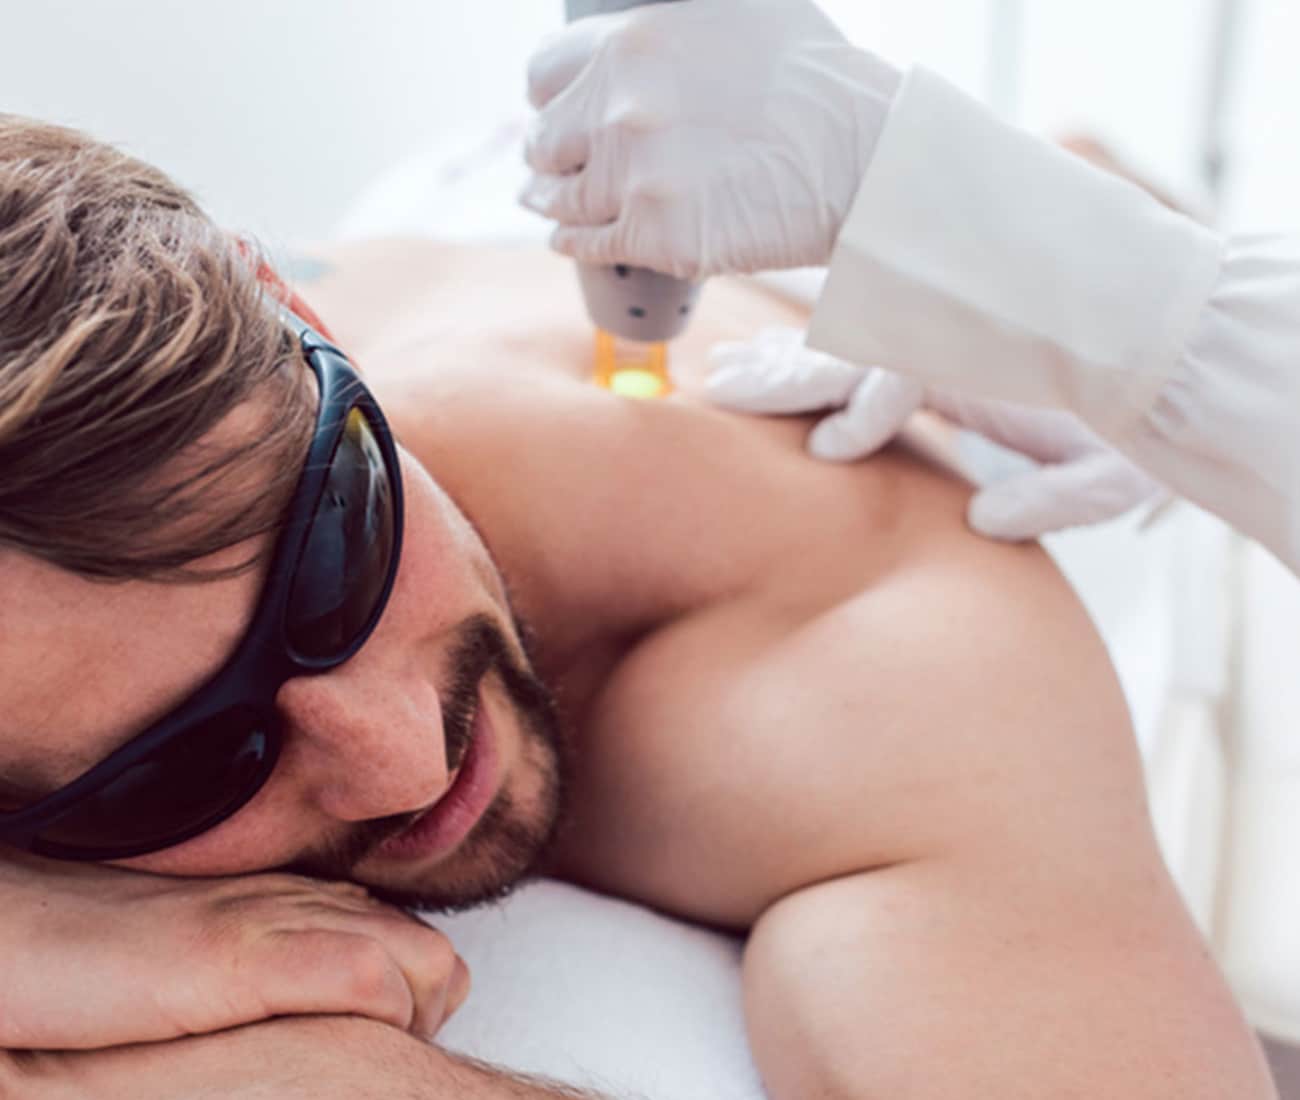 man receiving laser hair removal treatment on back